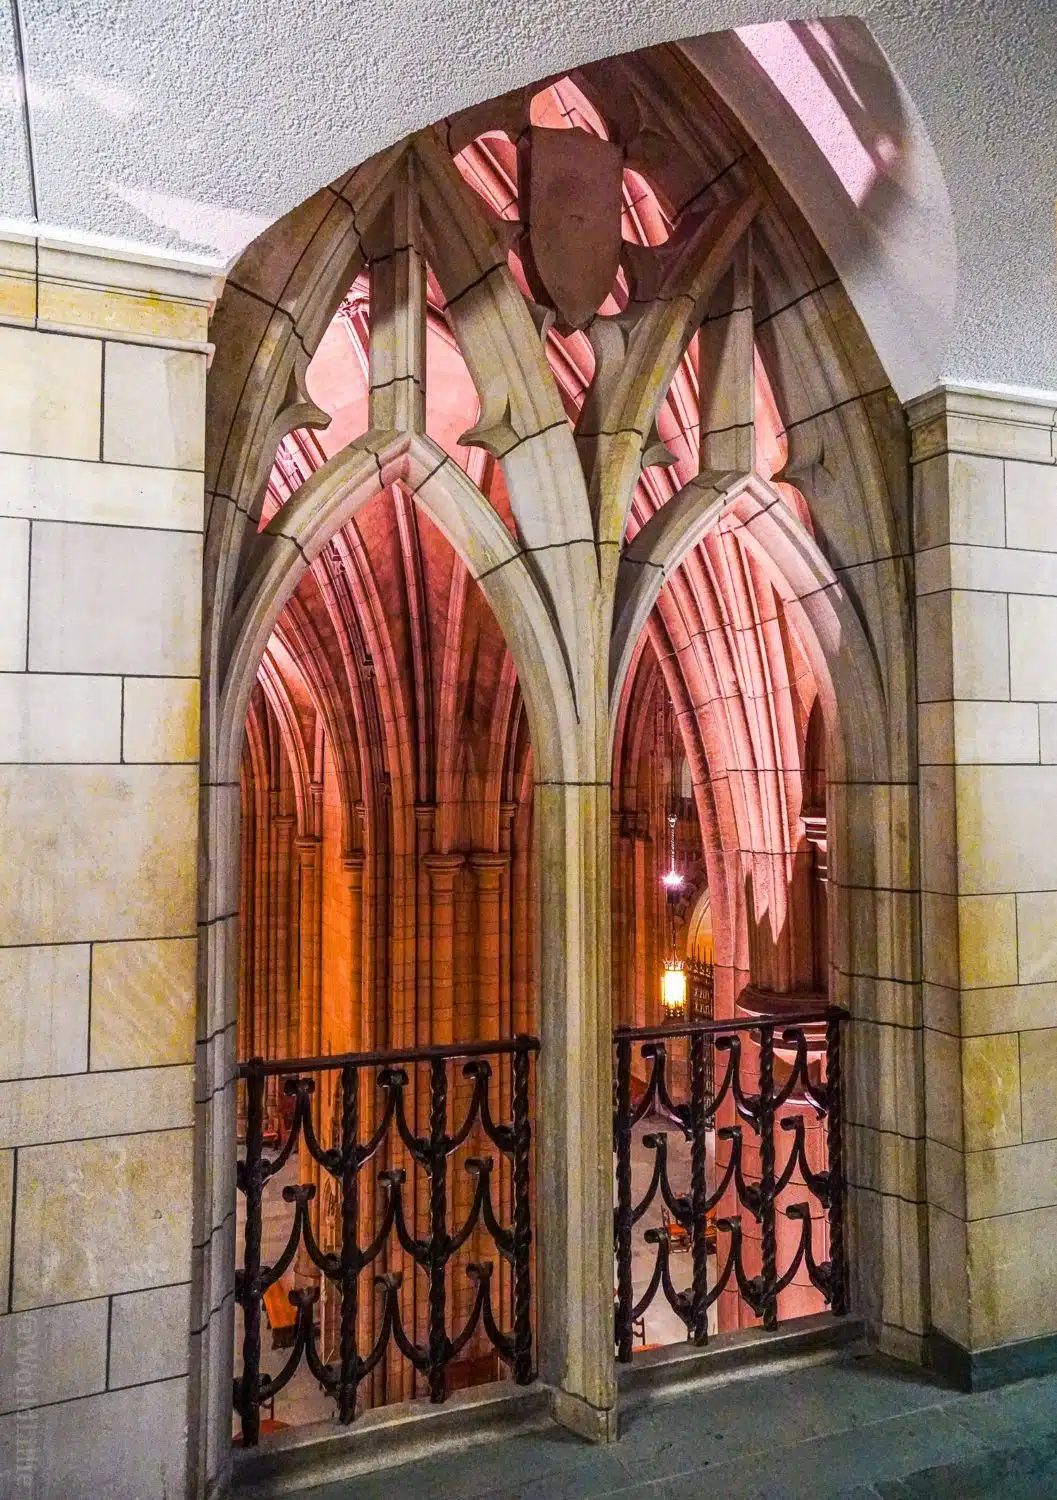 One of the upper balconies in the Cathedral of Learning.